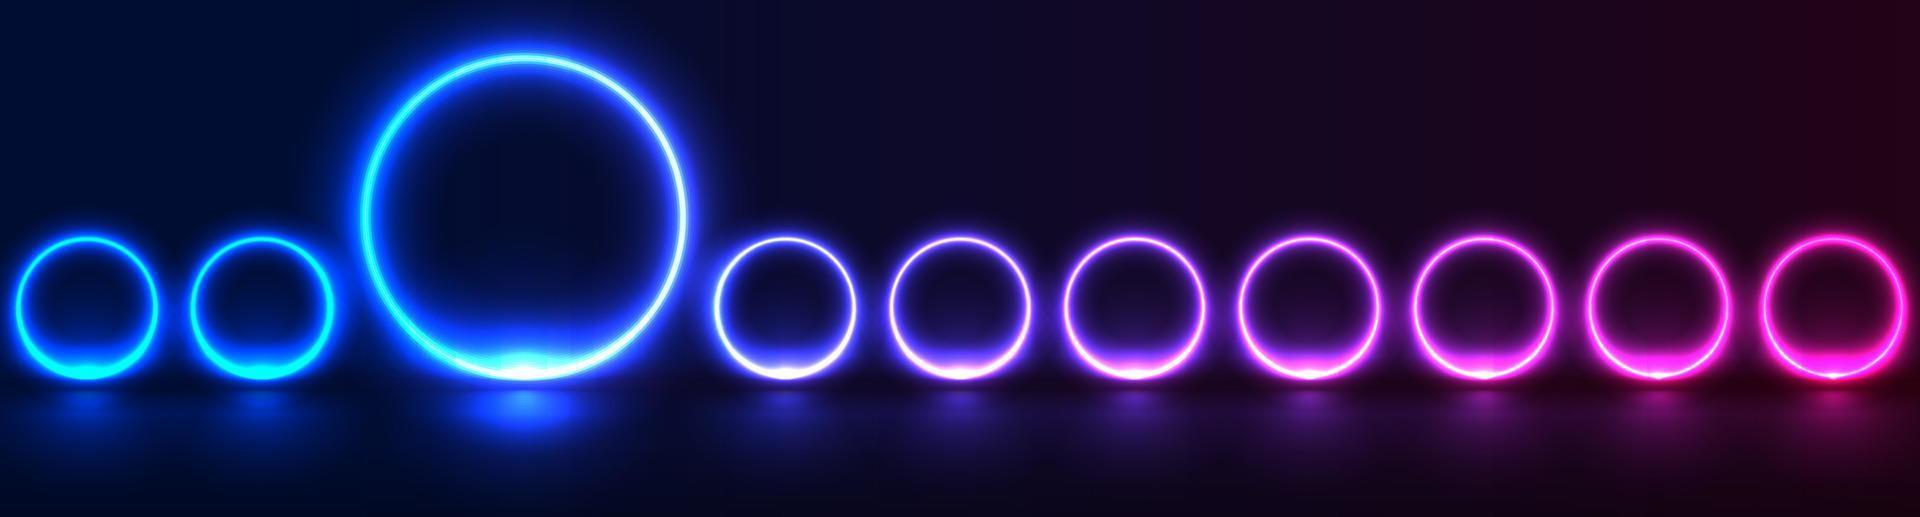 Concept abstract sci-fi banner with blue purple glowing neon circles vector